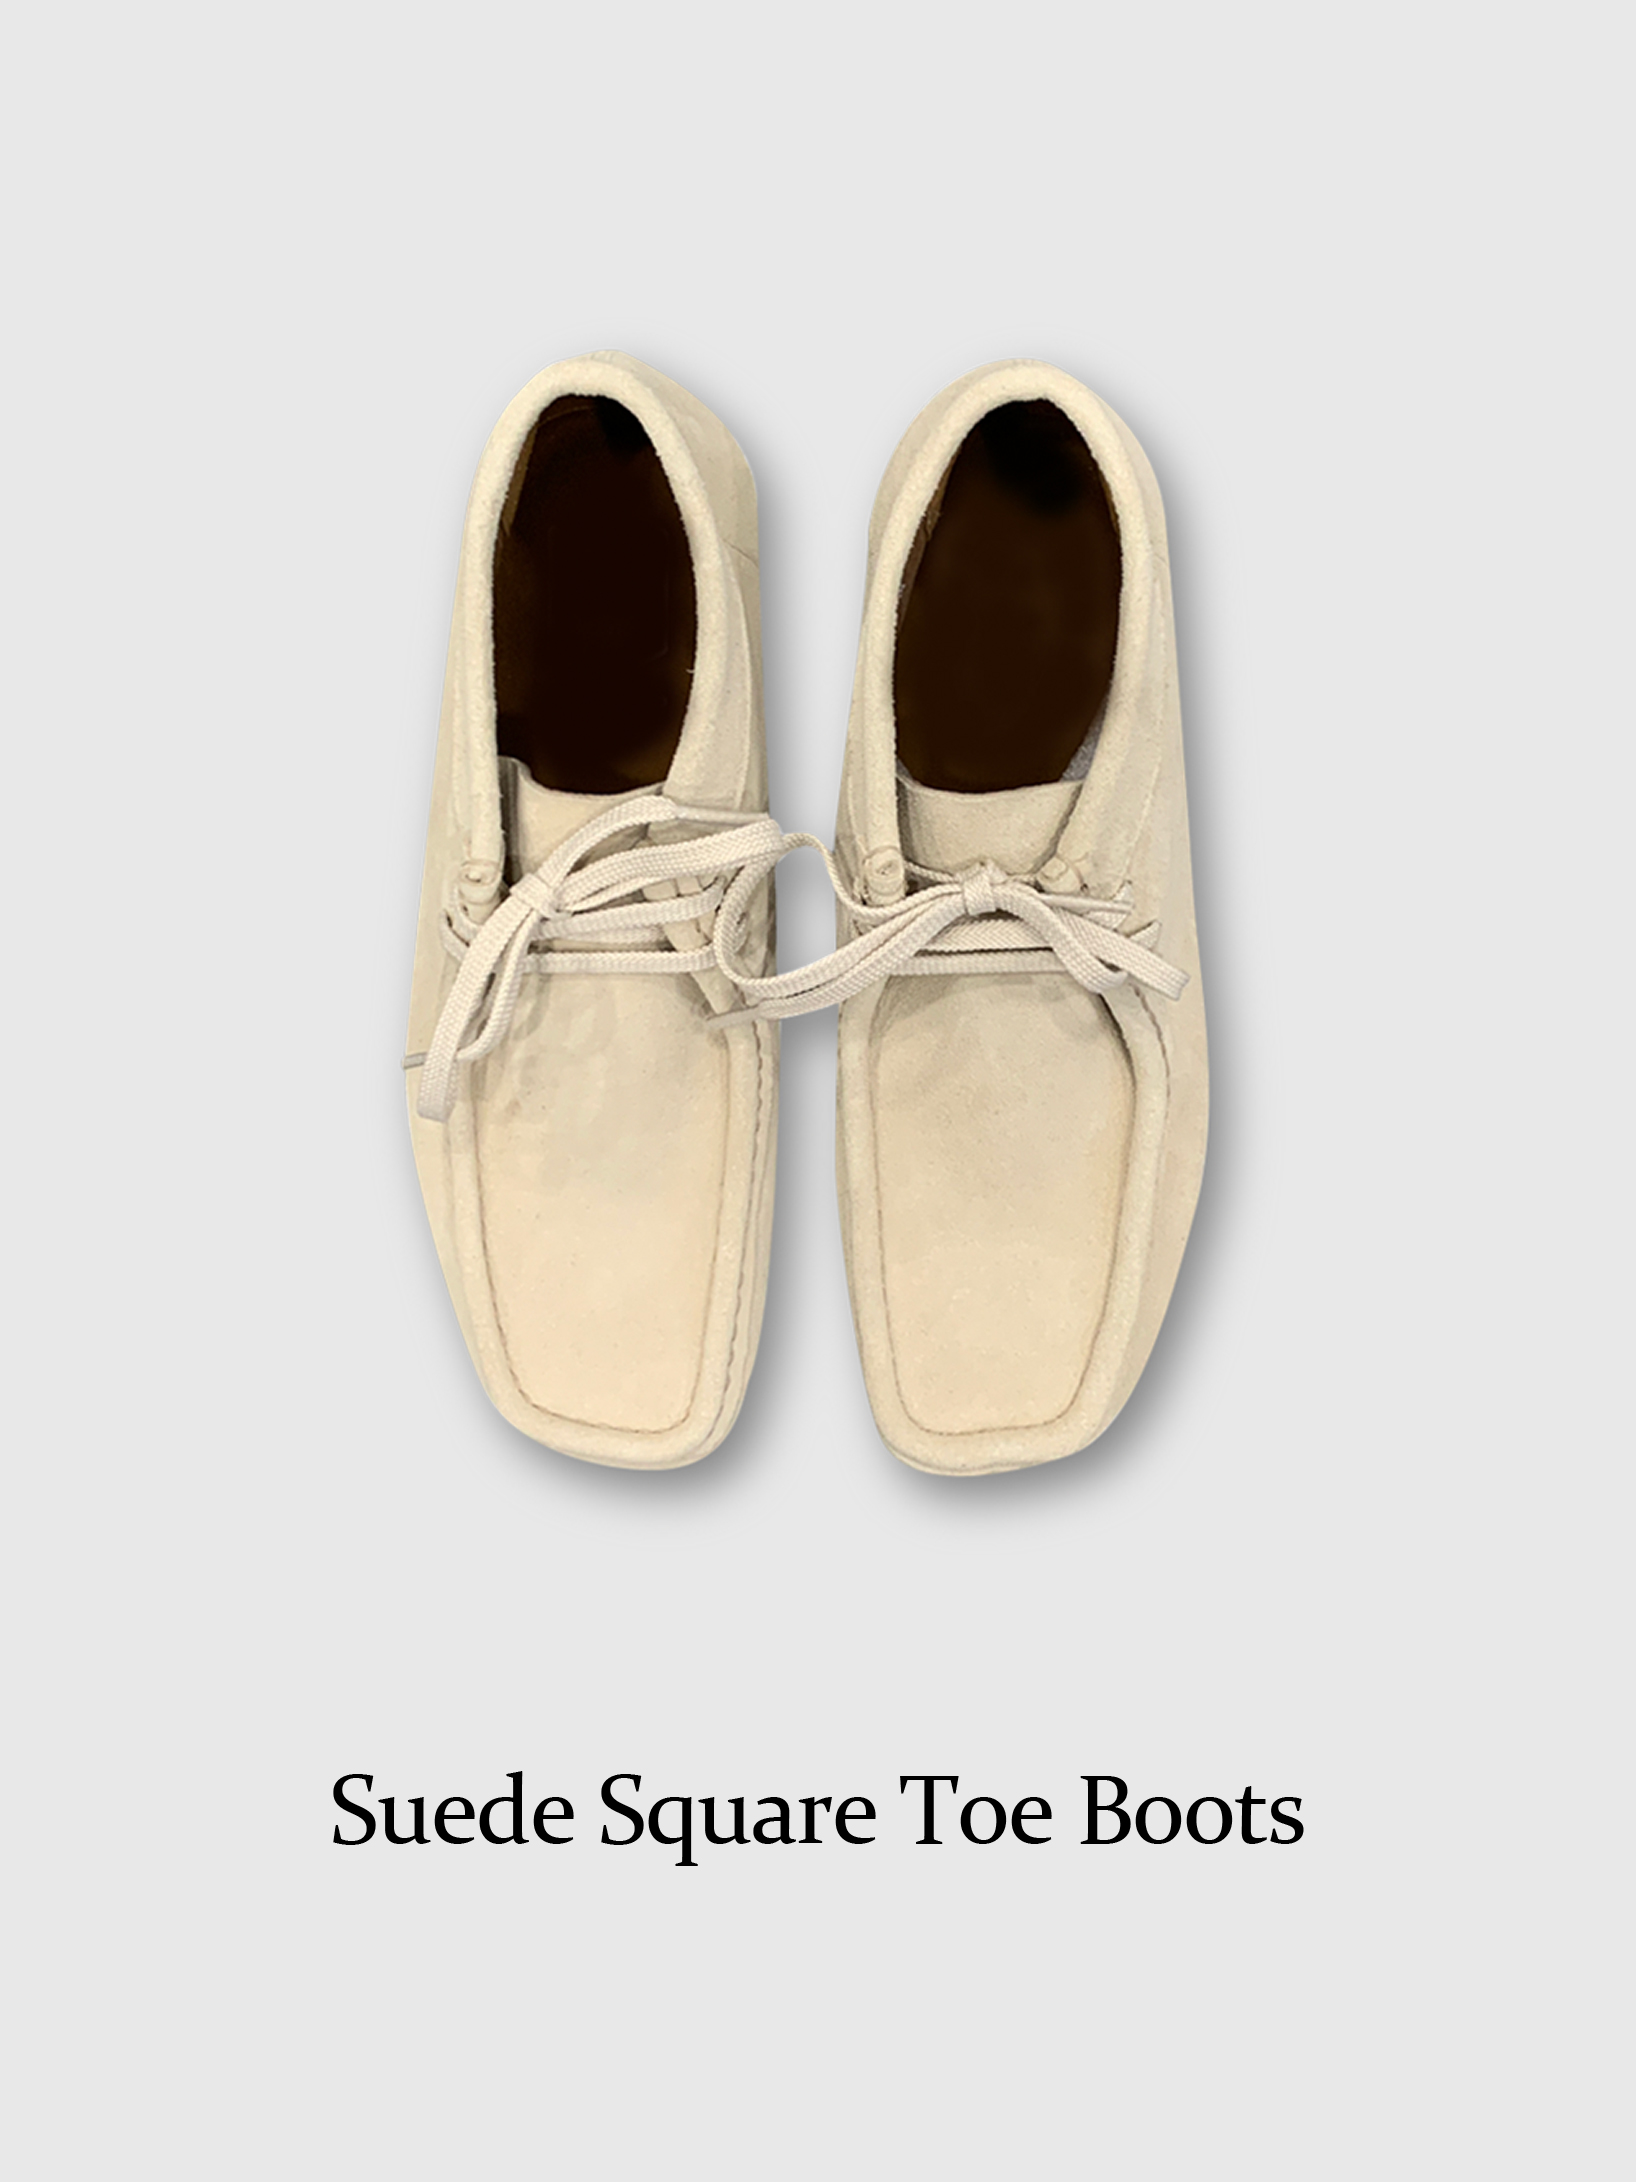 Suede Square Toe Boots